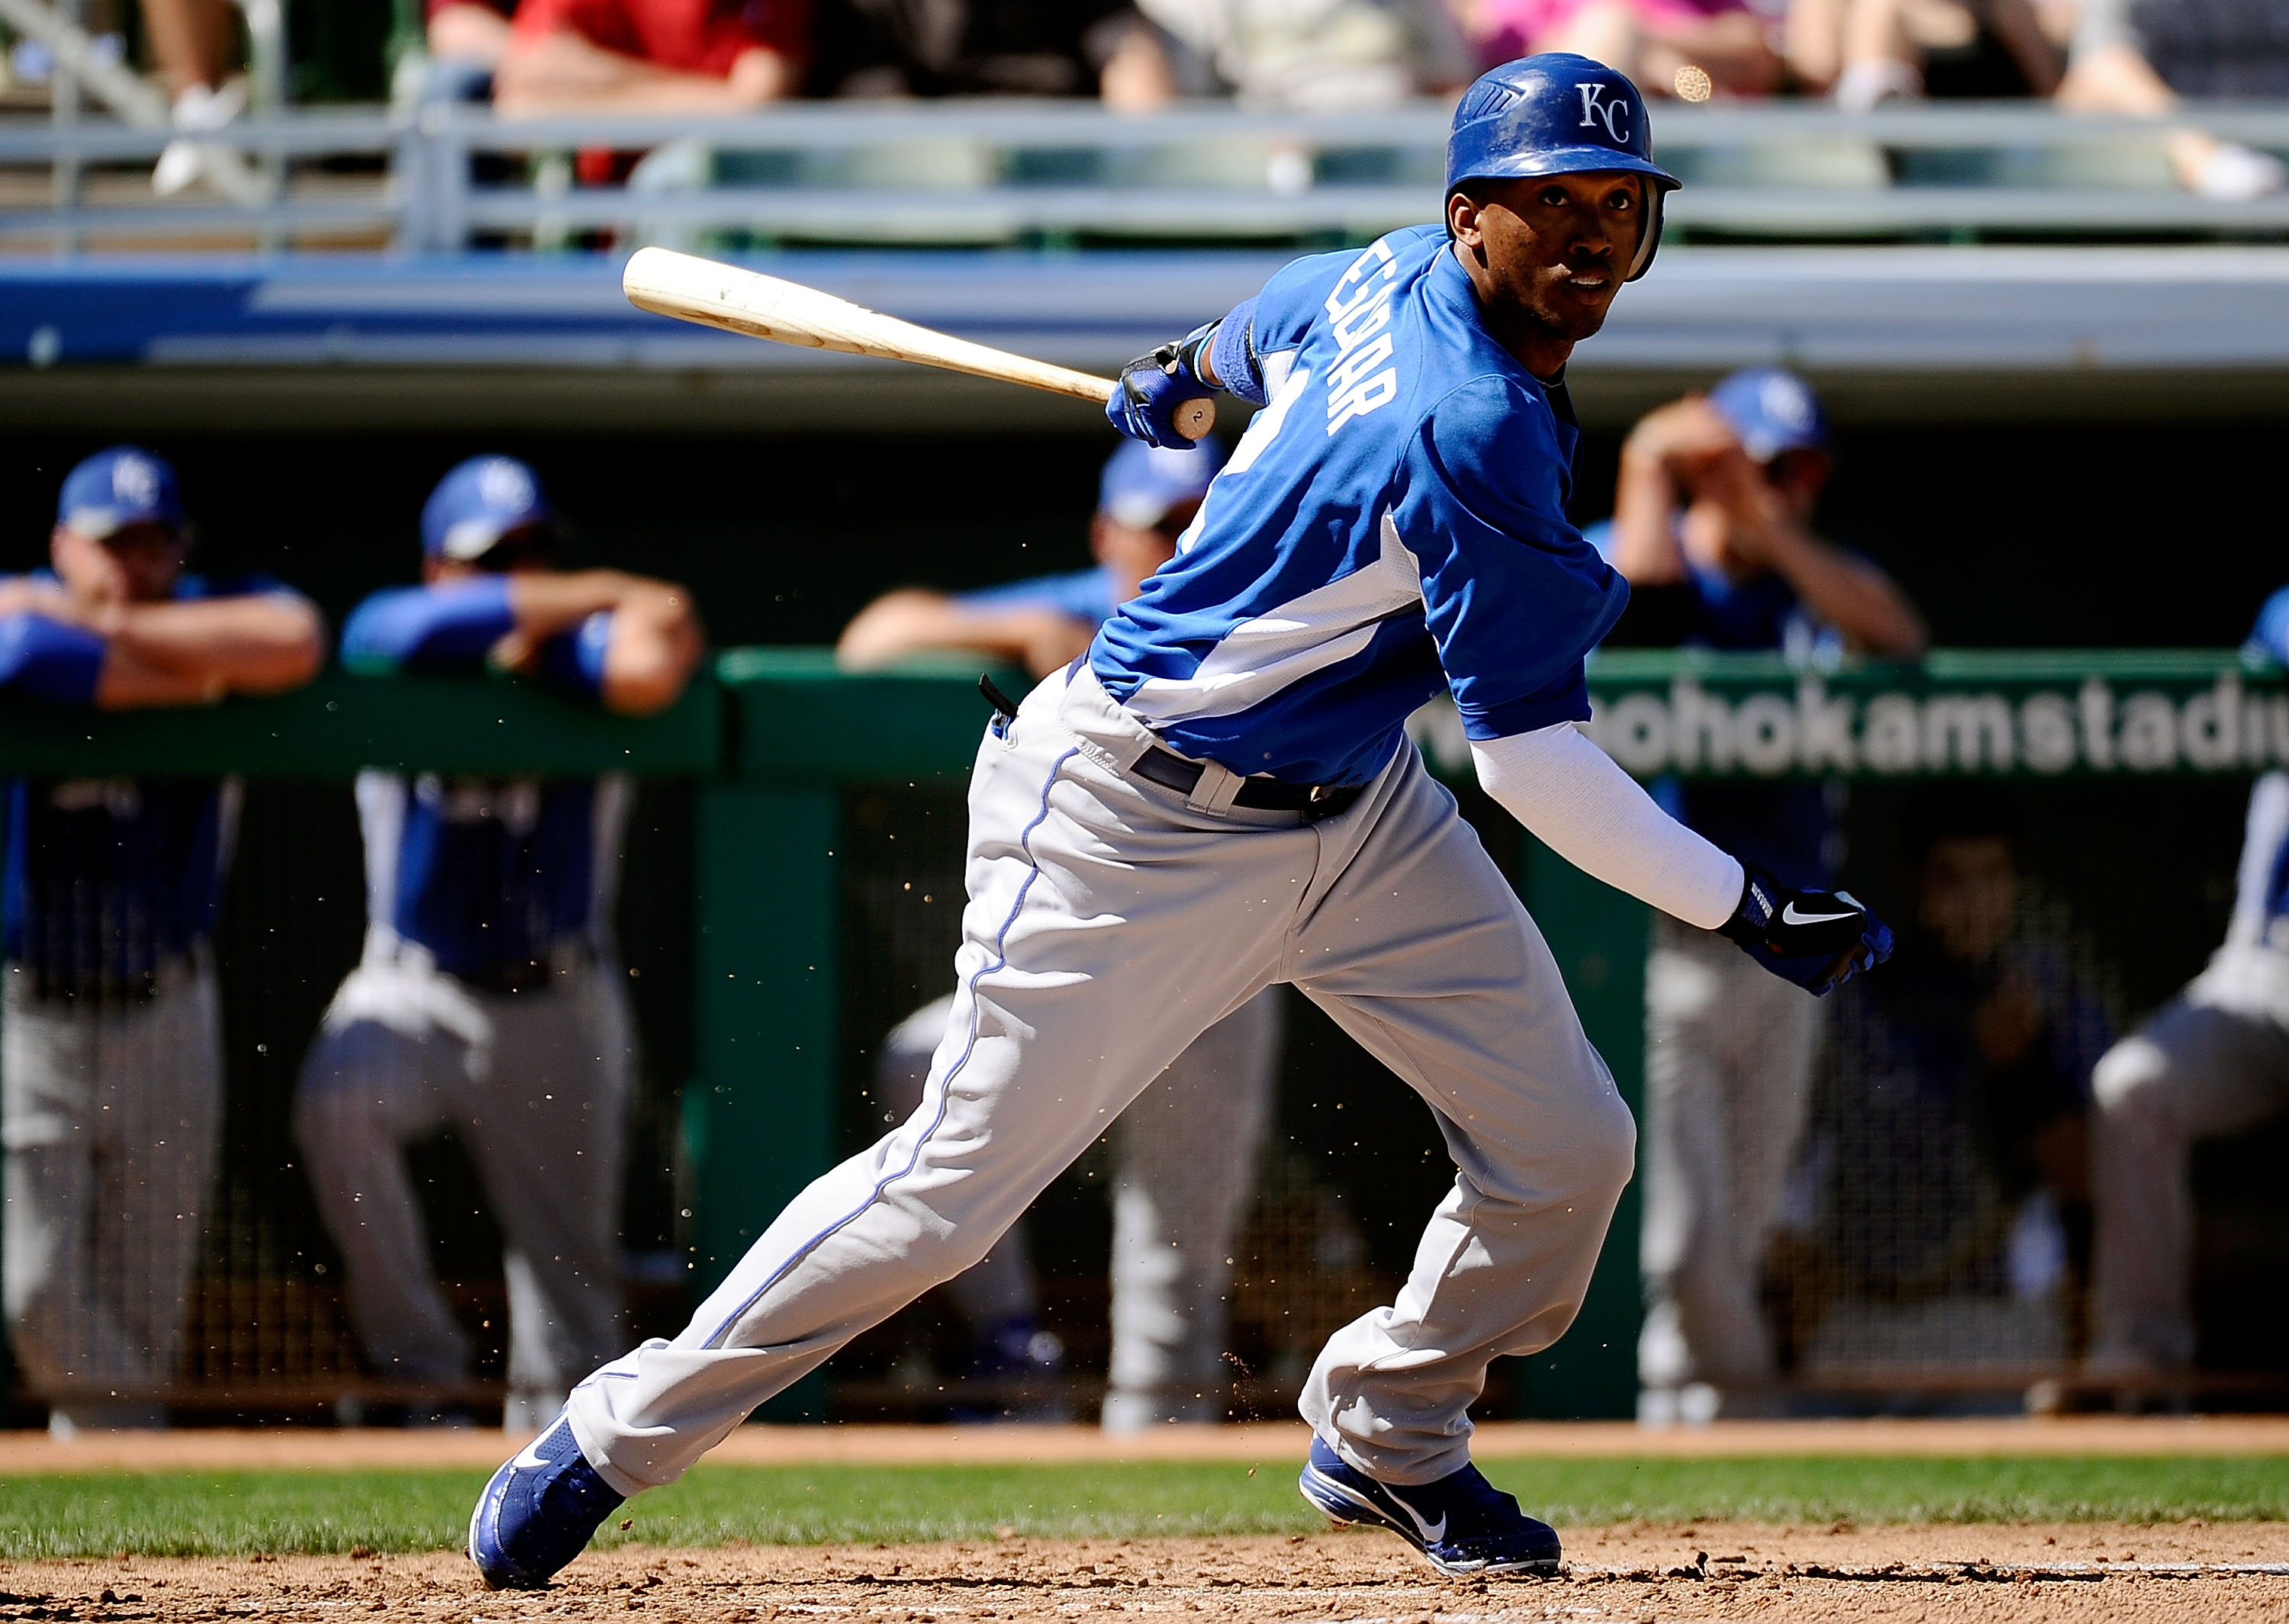 MESA, AZ - MARCH 09:  Alcides Escobar #2 of the Kansas City Royals at bat against the Chicago Cubs during the spring training baseball game at HoHoKam Stadium on March 9, 2011 in Mesa, Arizona.  (Photo by Kevork Djansezian/Getty Images)